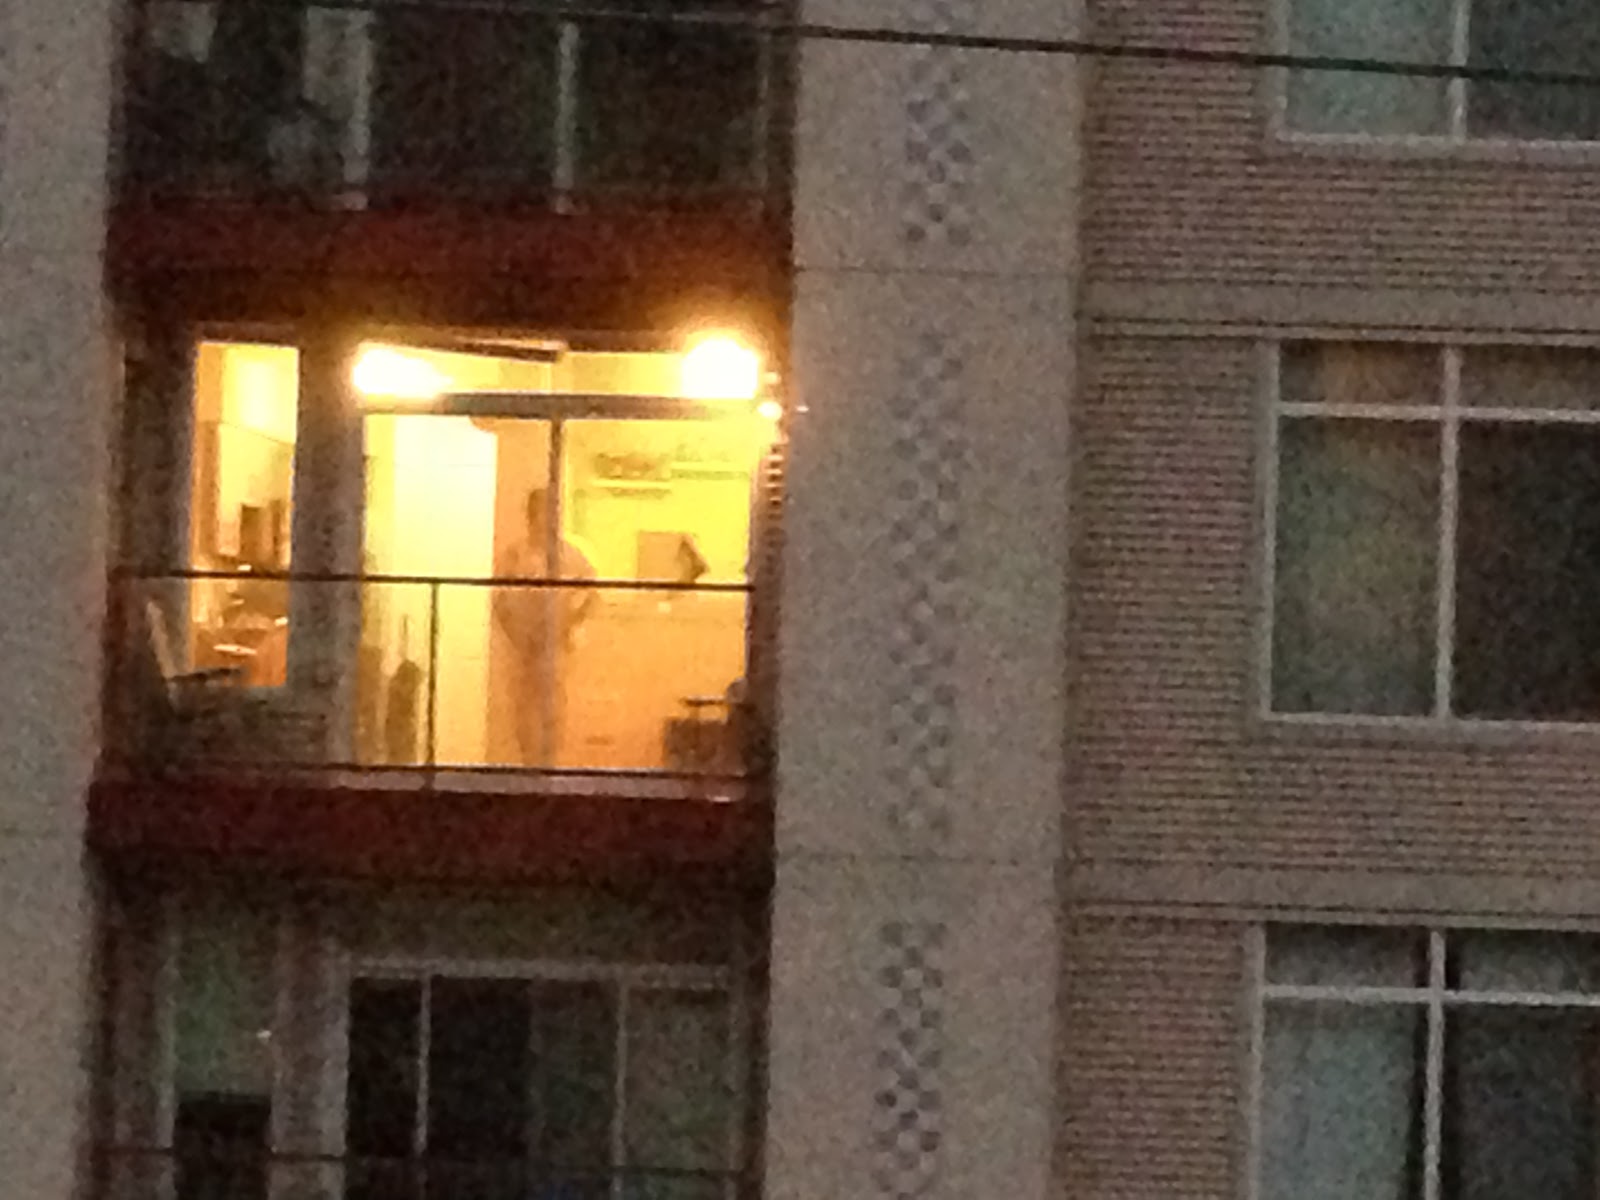 No Reply Okcupid Dating Apartment Window Naked